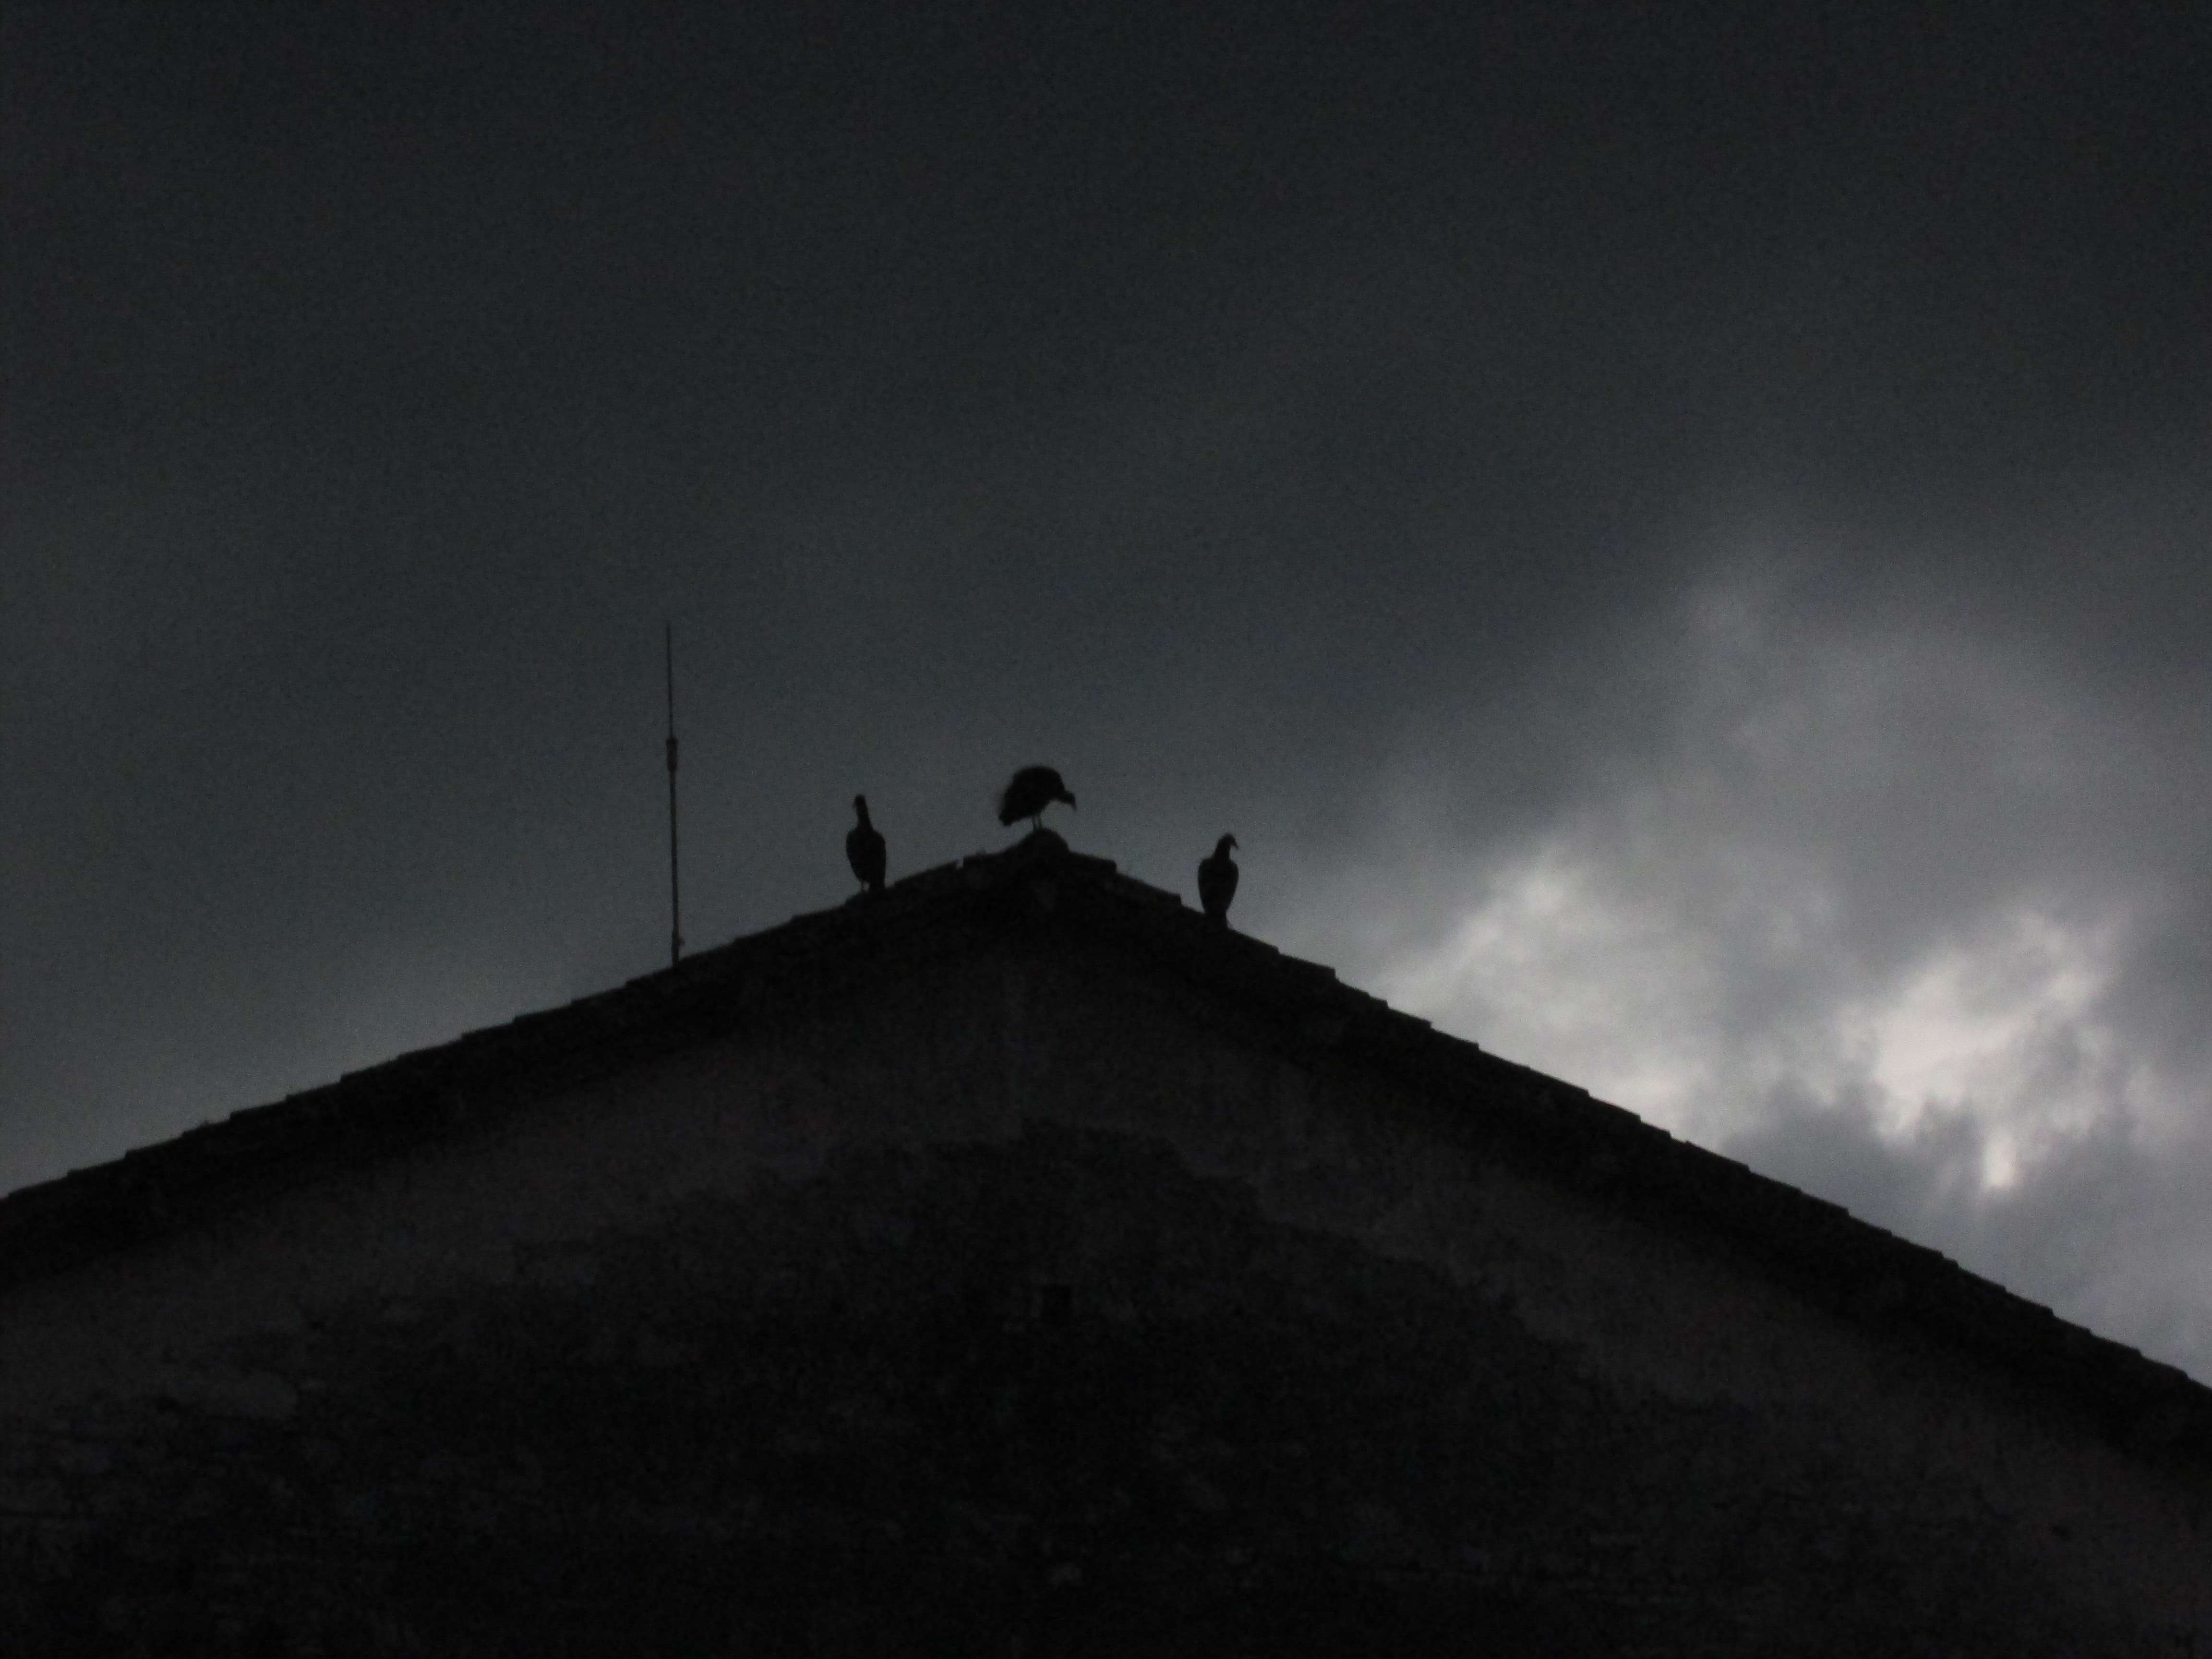 Three vultures on a rooftop, against dark clouds